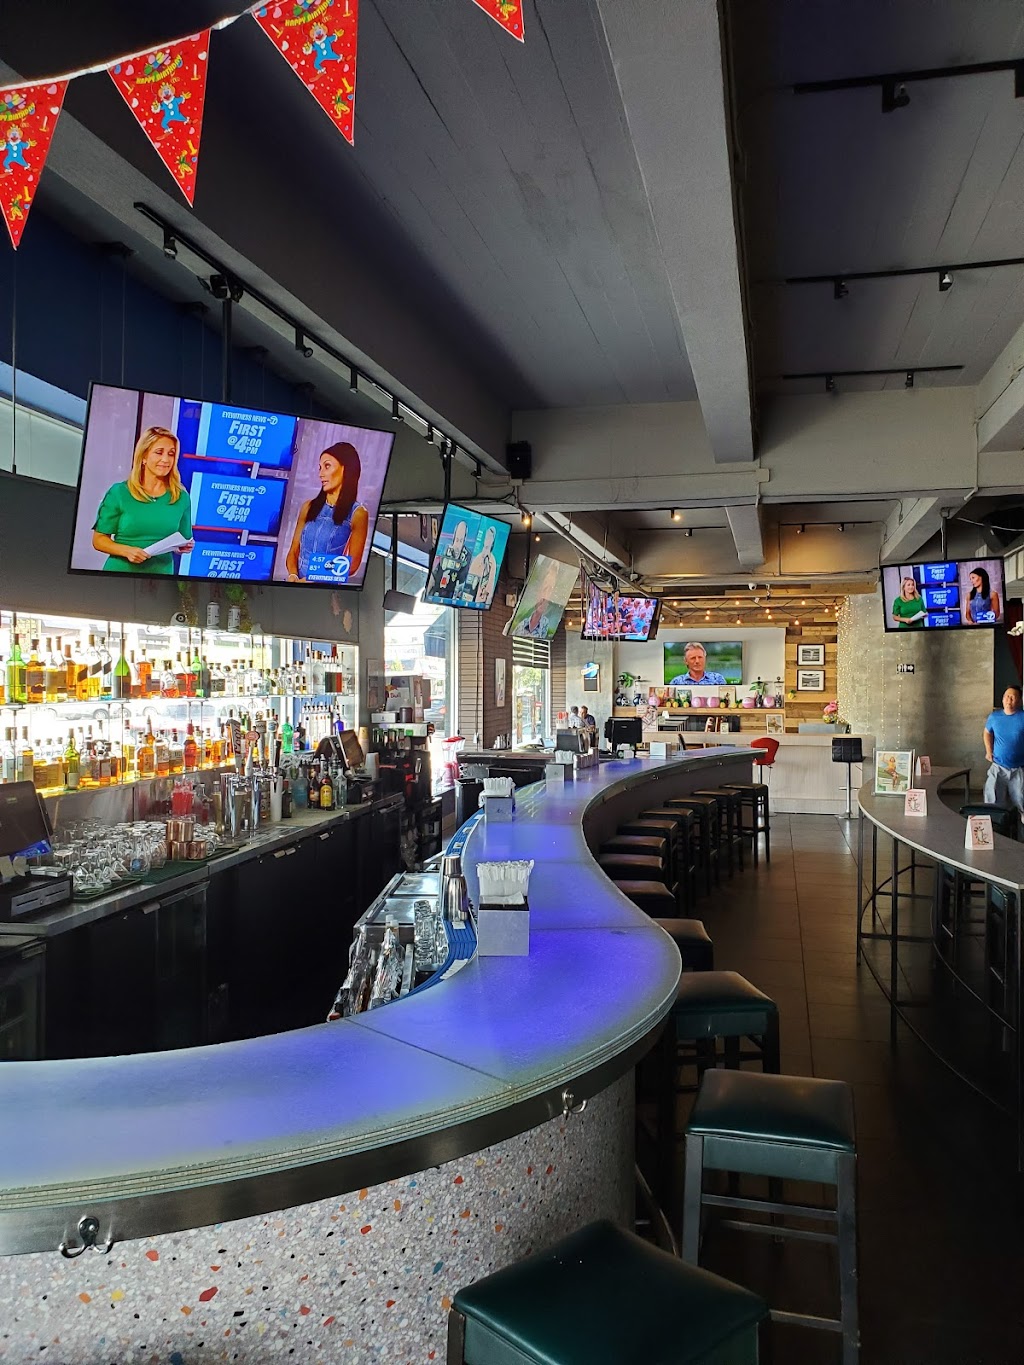 CUE BAR | 45-18 Bell Blvd, Queens, NY 11361 | Phone: (718) 631-2646